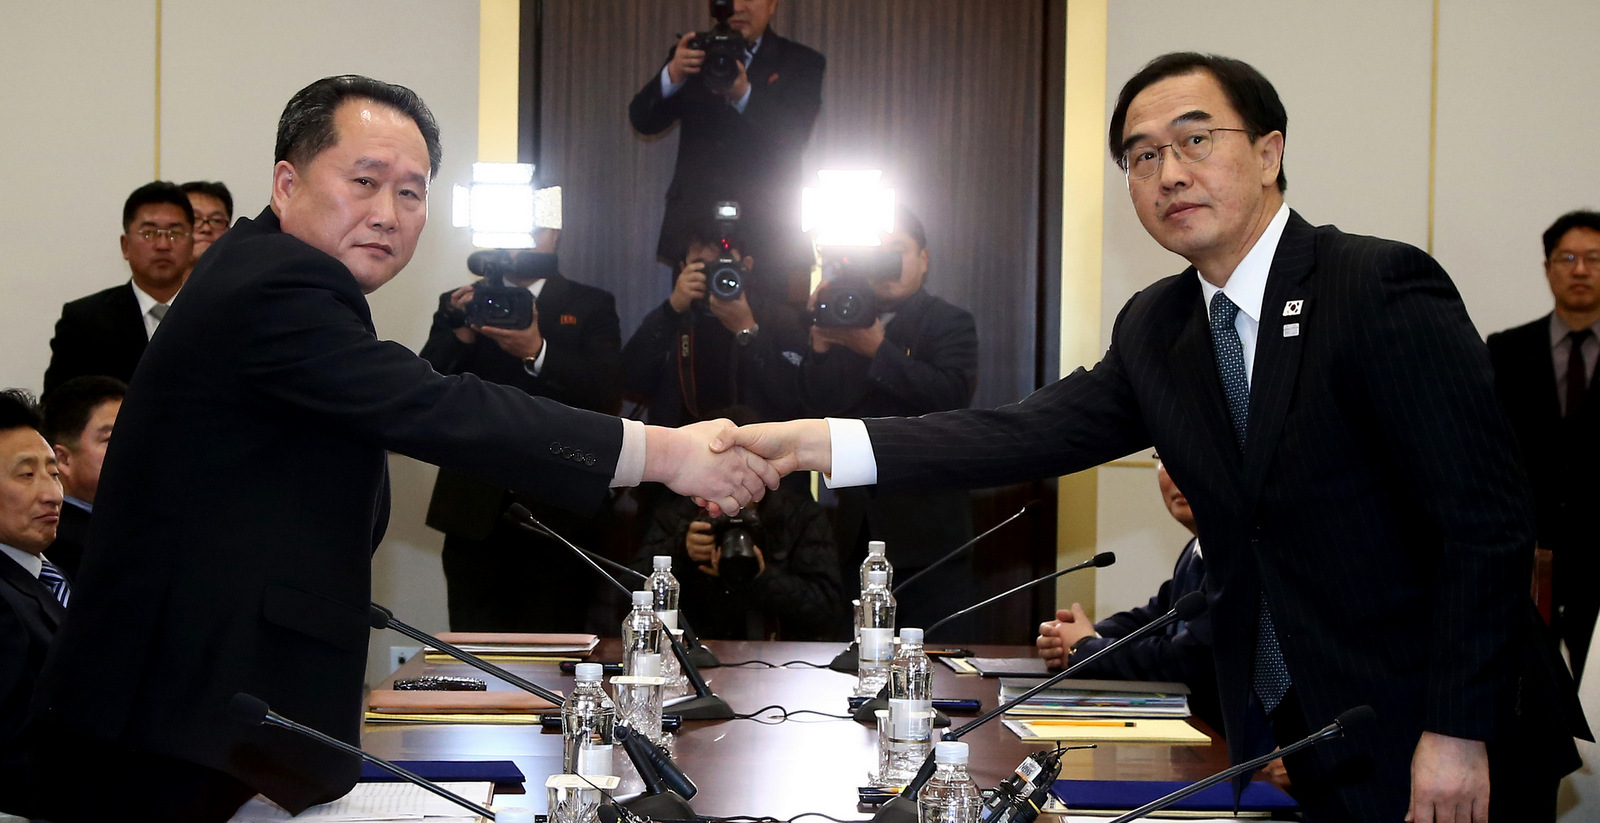 South Korean Unification Minister Cho Myoung-gyon, right, shakes hands with the head of North Korean delegation Ri Son Gwon during their meeting at the Panmunjom in the Demilitarized Zone in Paju, South Korea, Jan. 9, 2018. The rival Koreas took steps toward reducing their bitter animosity during rare talks Tuesday, as North Korea agreed to send a delegation to next month's Winter Olympics in South Korea and reopen a military hotline. (Korea Pool via AP)